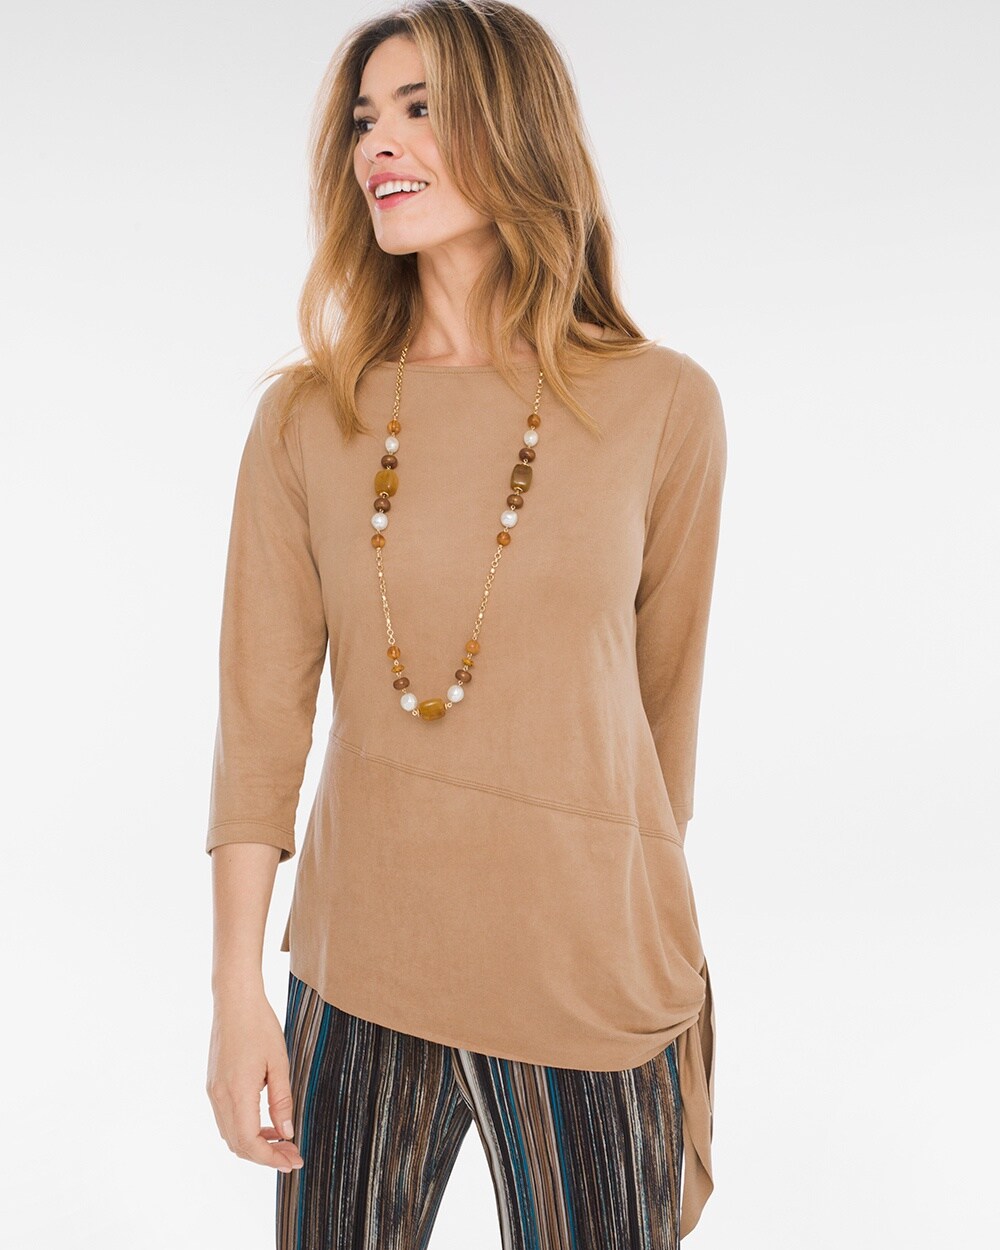 Travelers Collection Sueded Top